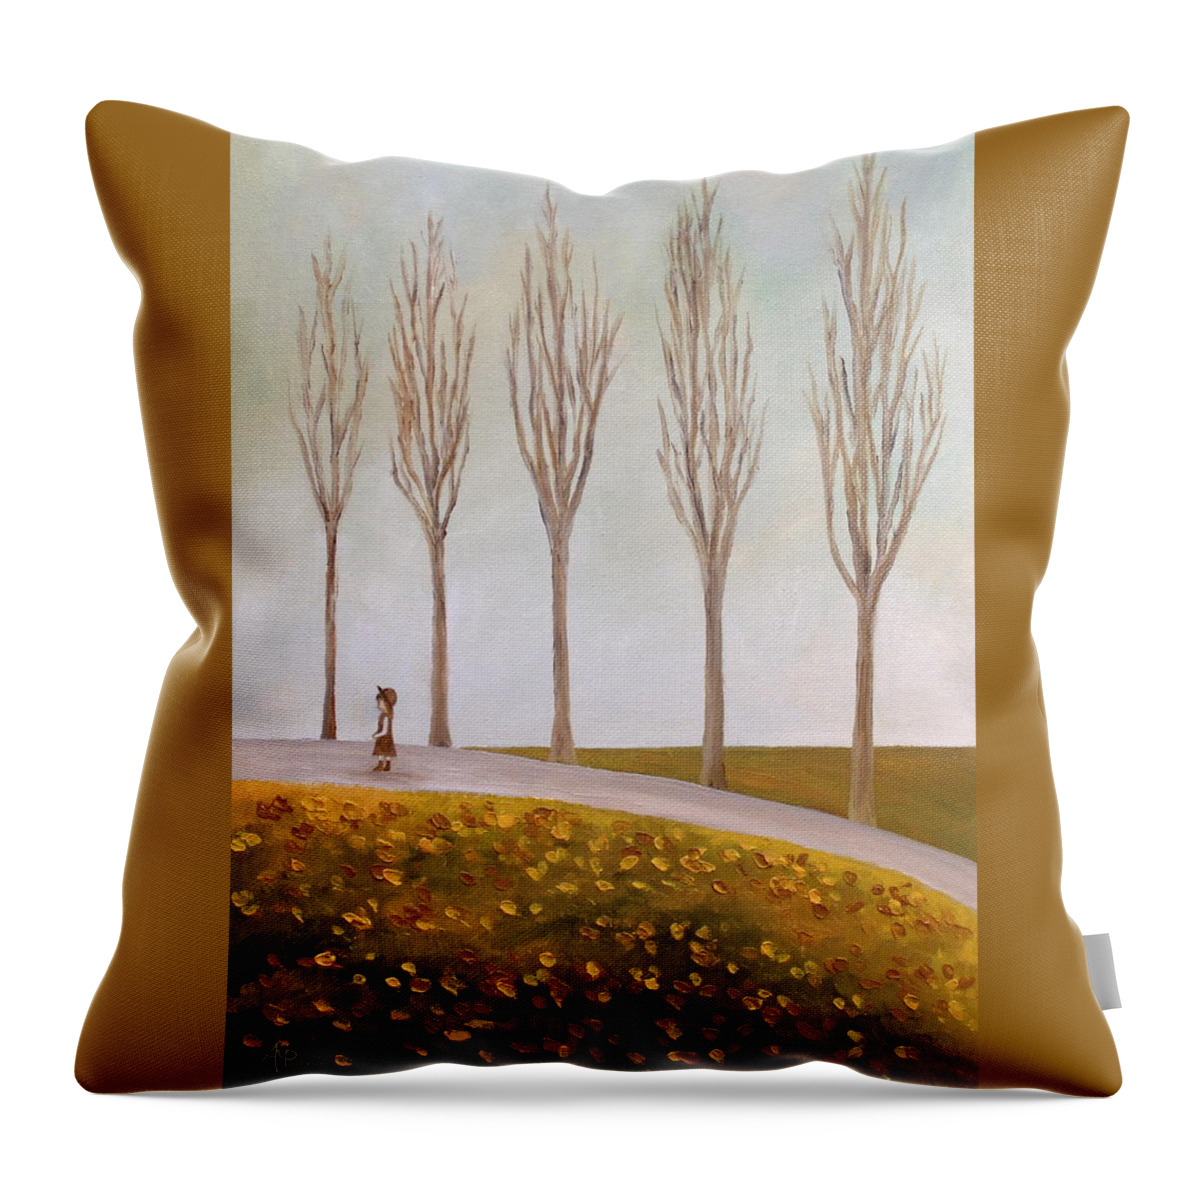 Elms Throw Pillow featuring the painting Days When The Rains Came by Angeles M Pomata